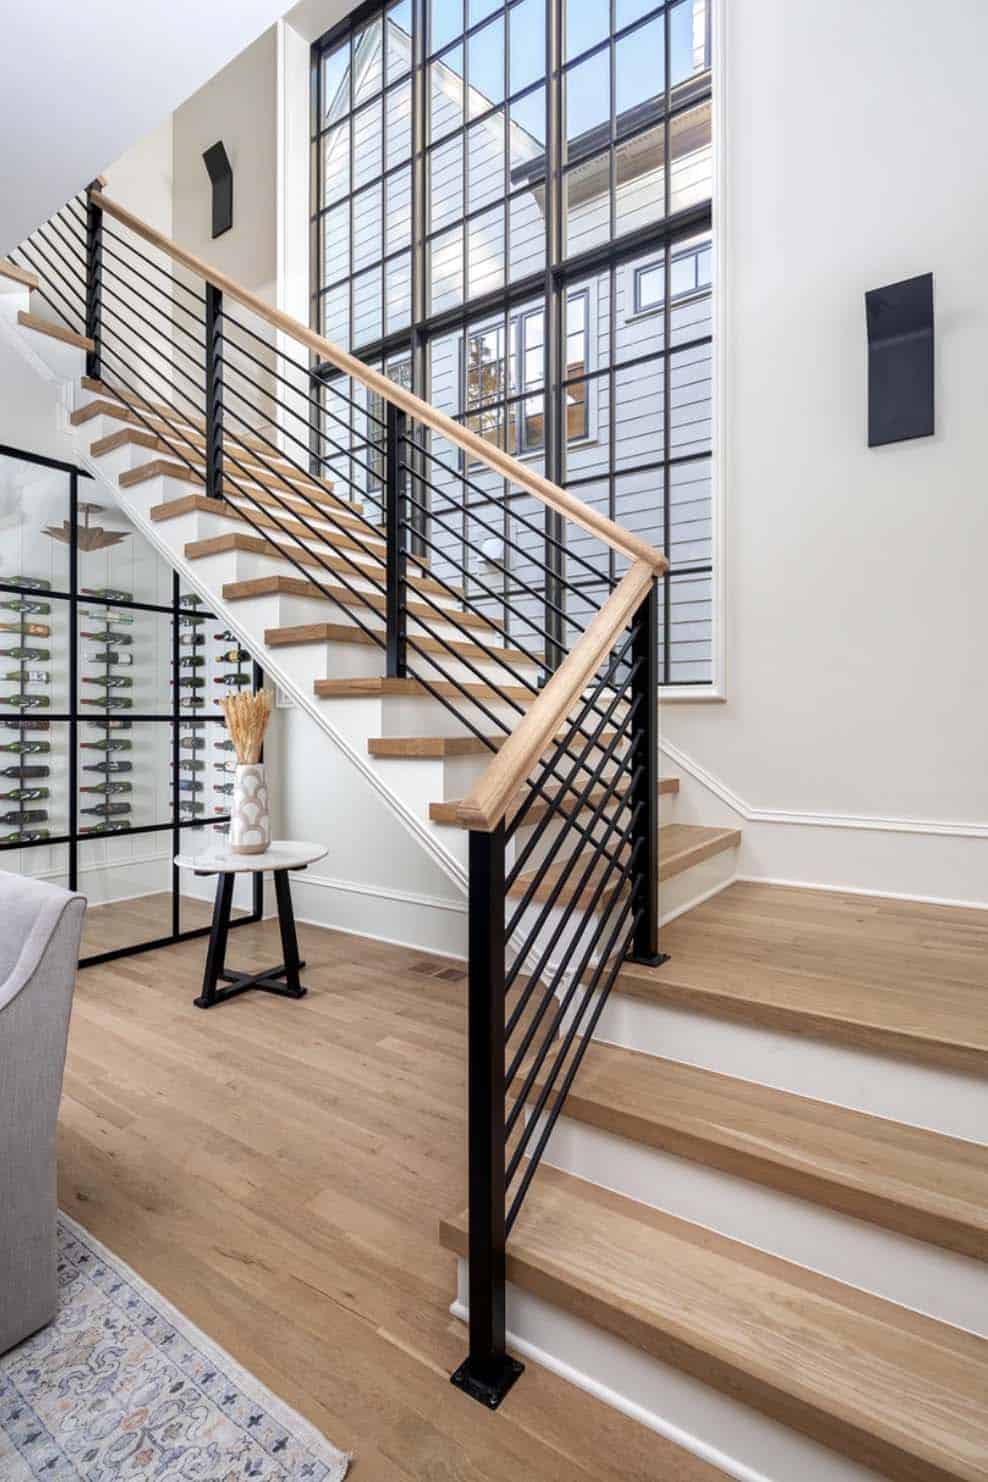 transitional wine storage underneath the staircase